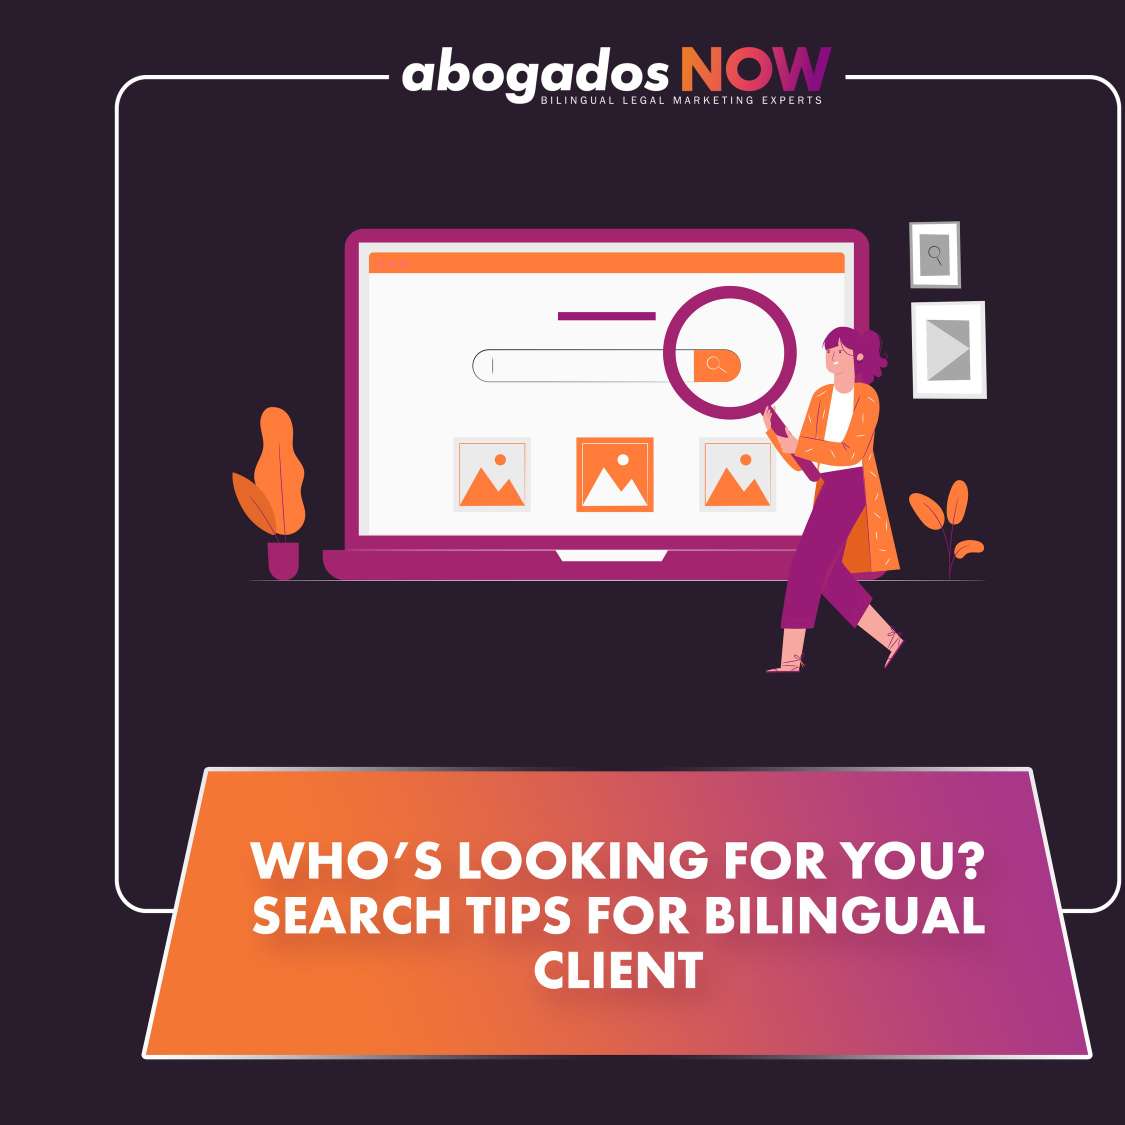 Abogados NOW Search Tips for Legal Marketing Law Firm 2022